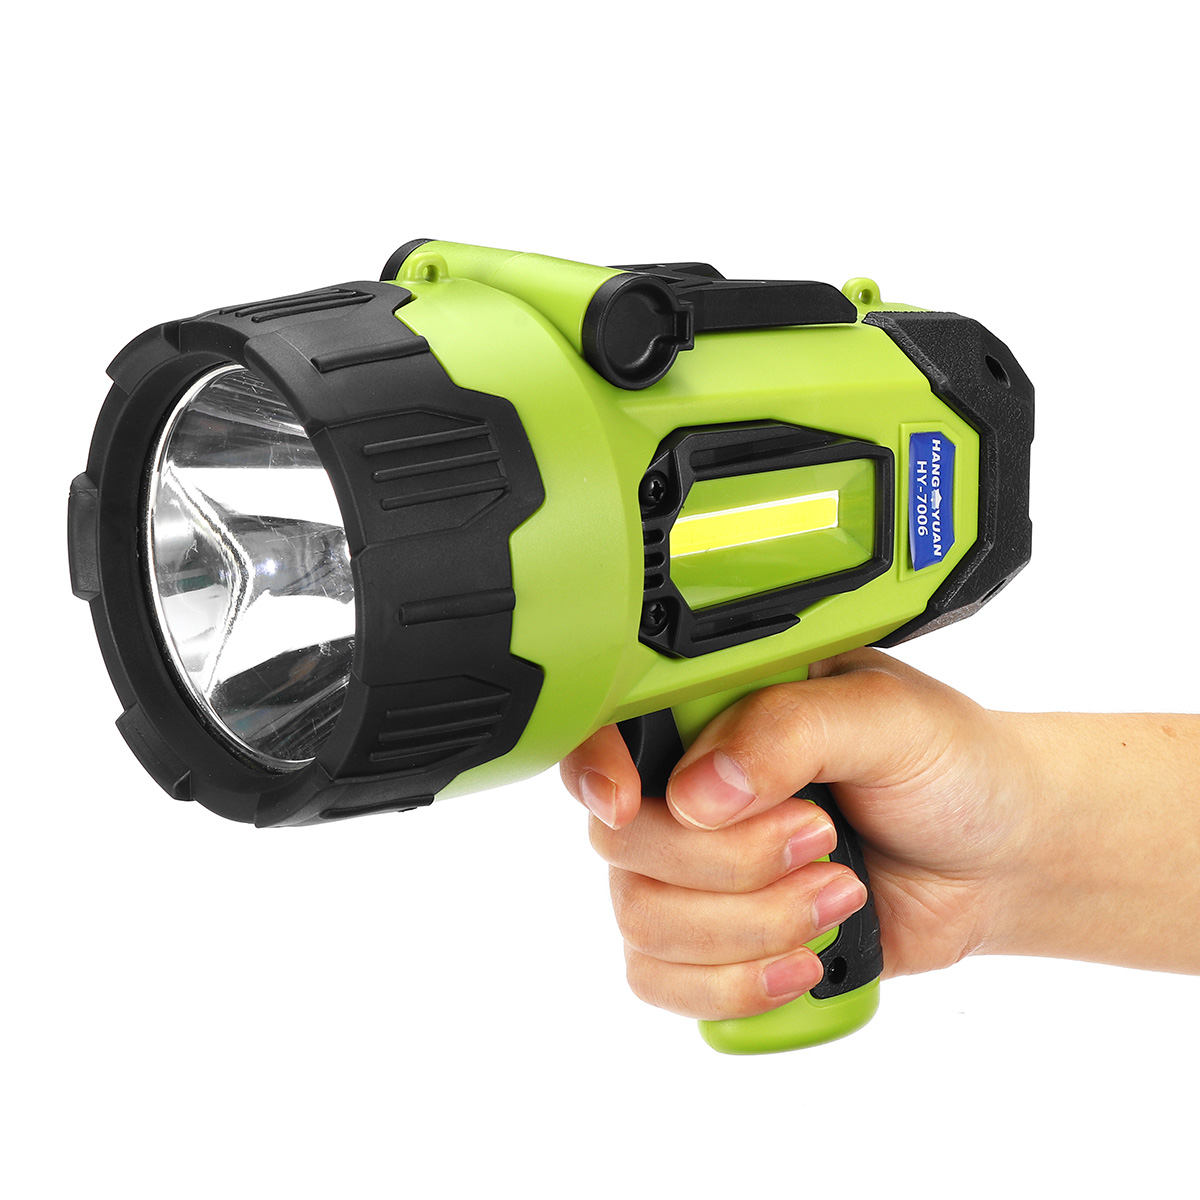 Find Long Shoot Strong LED Spotlight With Sidelight Multifunctional Outdoor Handheld Searchlight Powerful Flashlight for Sale on Gipsybee.com with cryptocurrencies